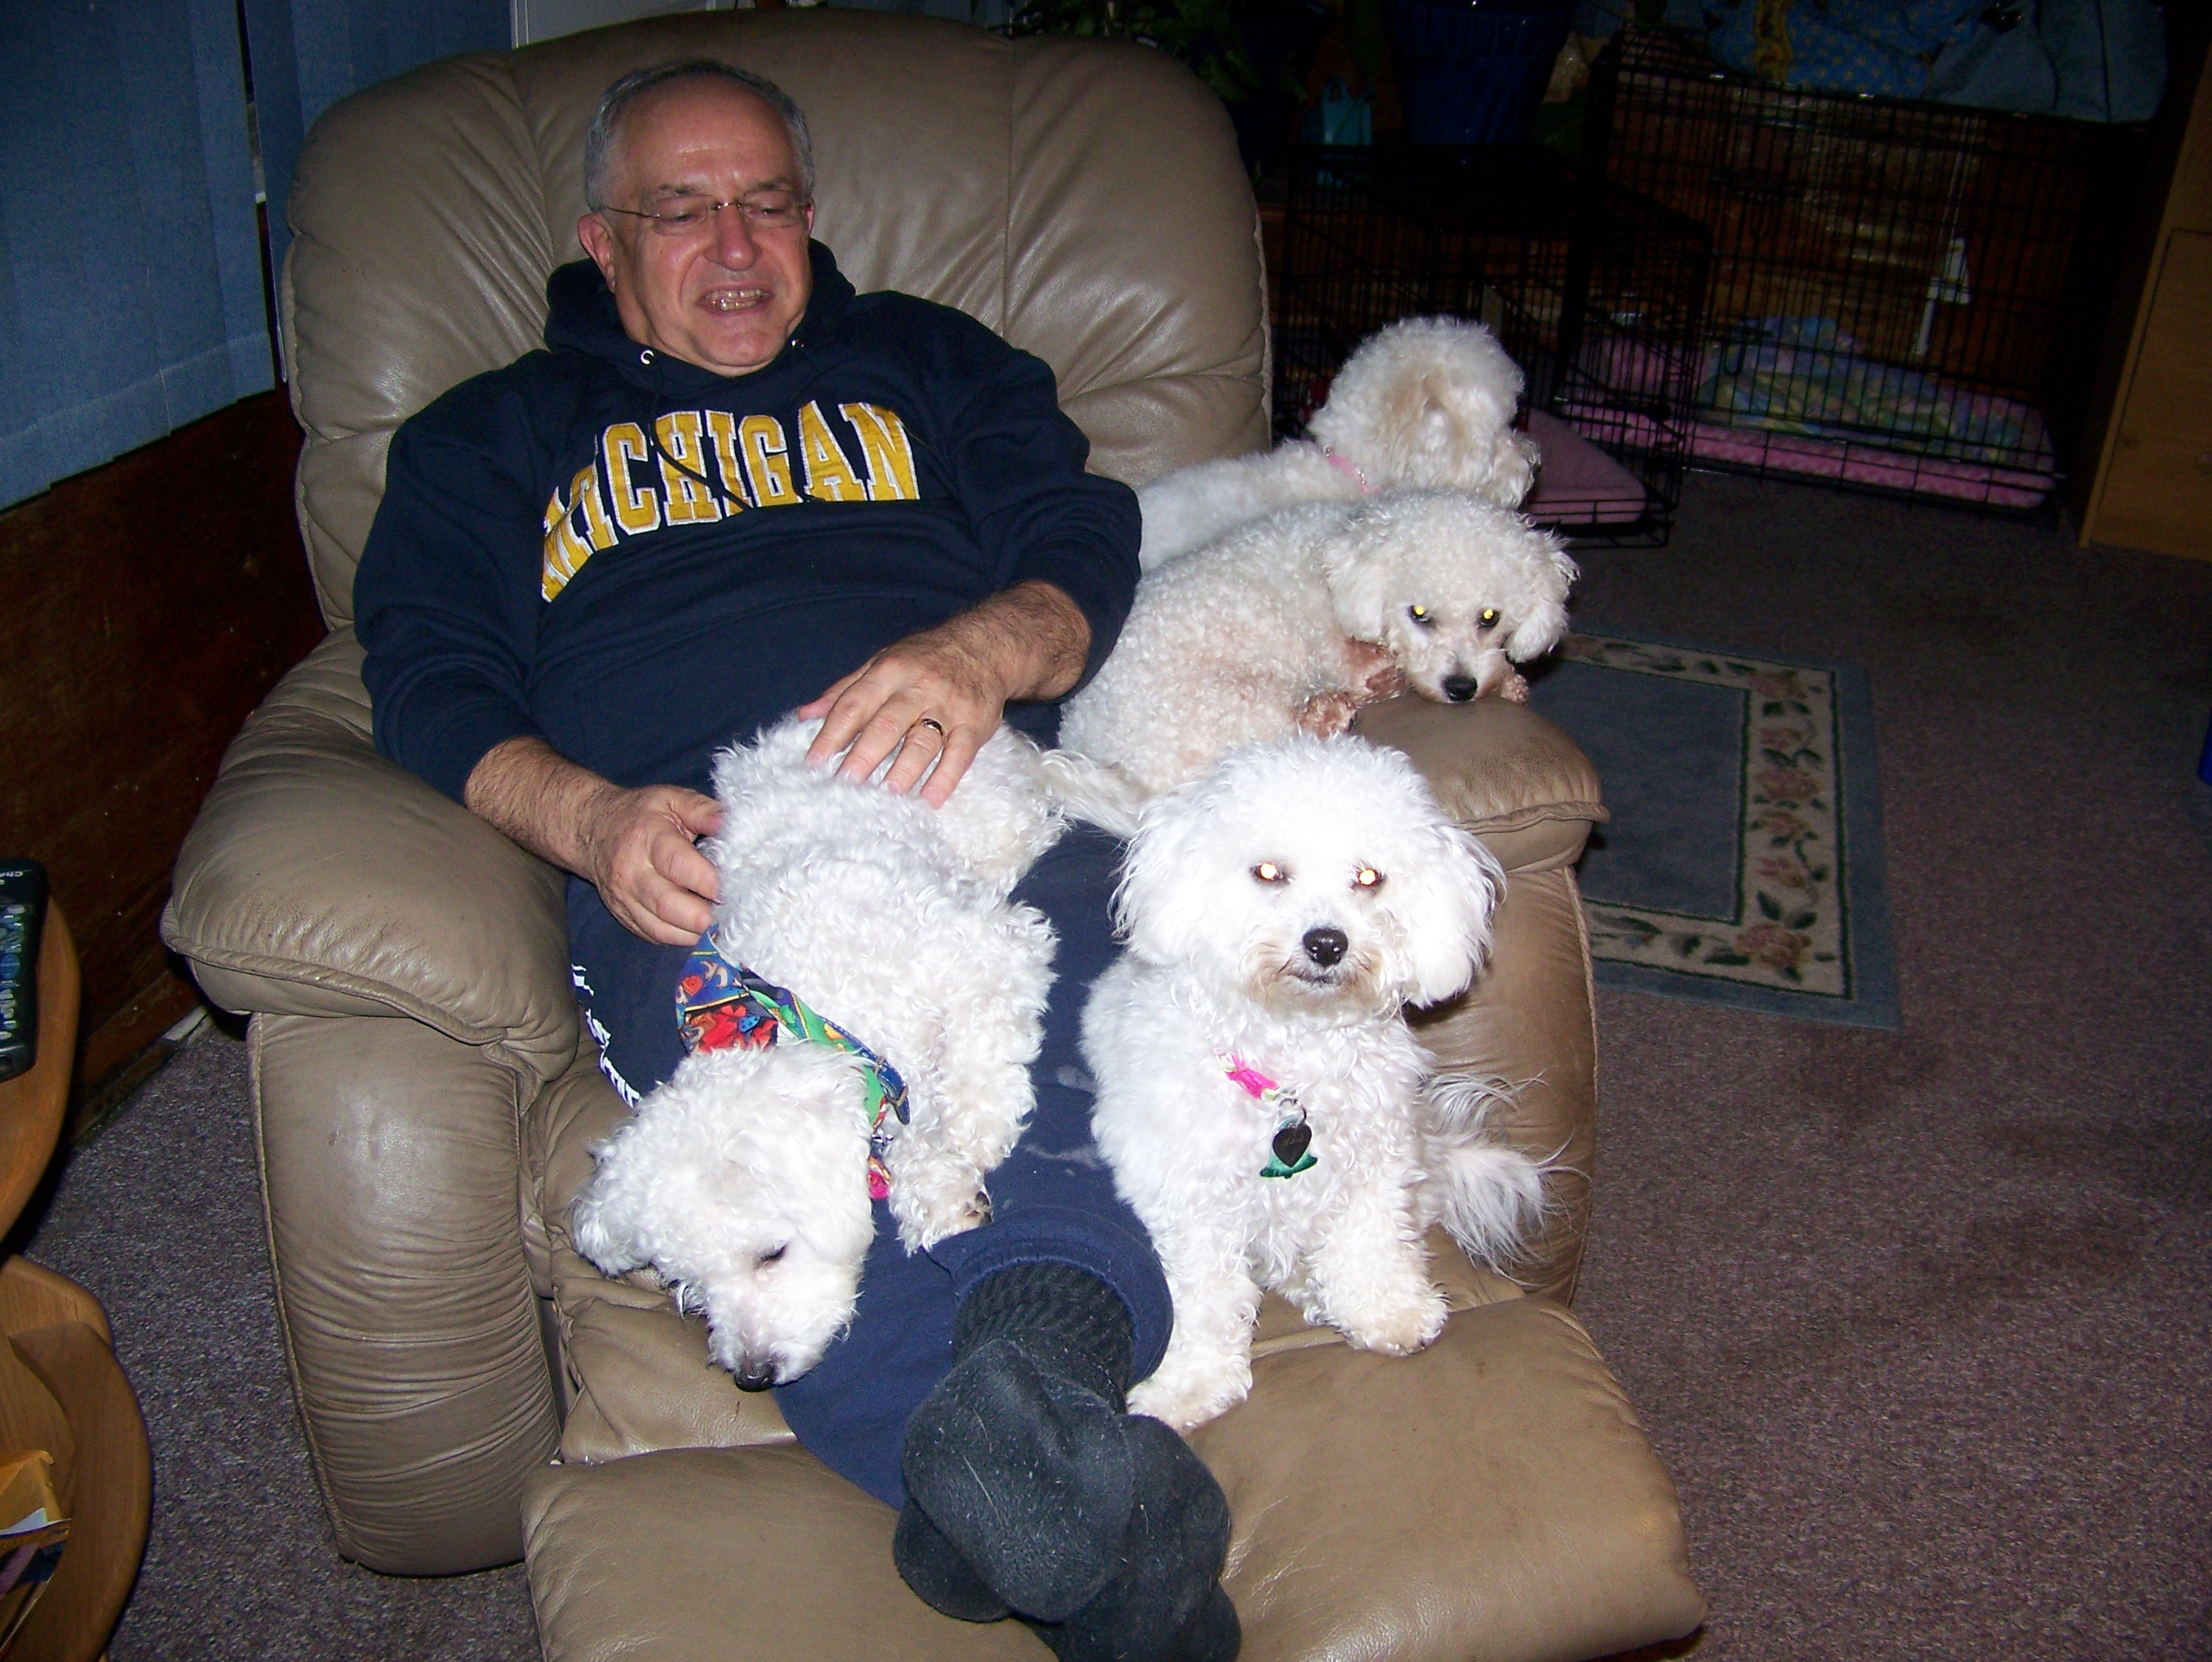 Ron covered in Bichons